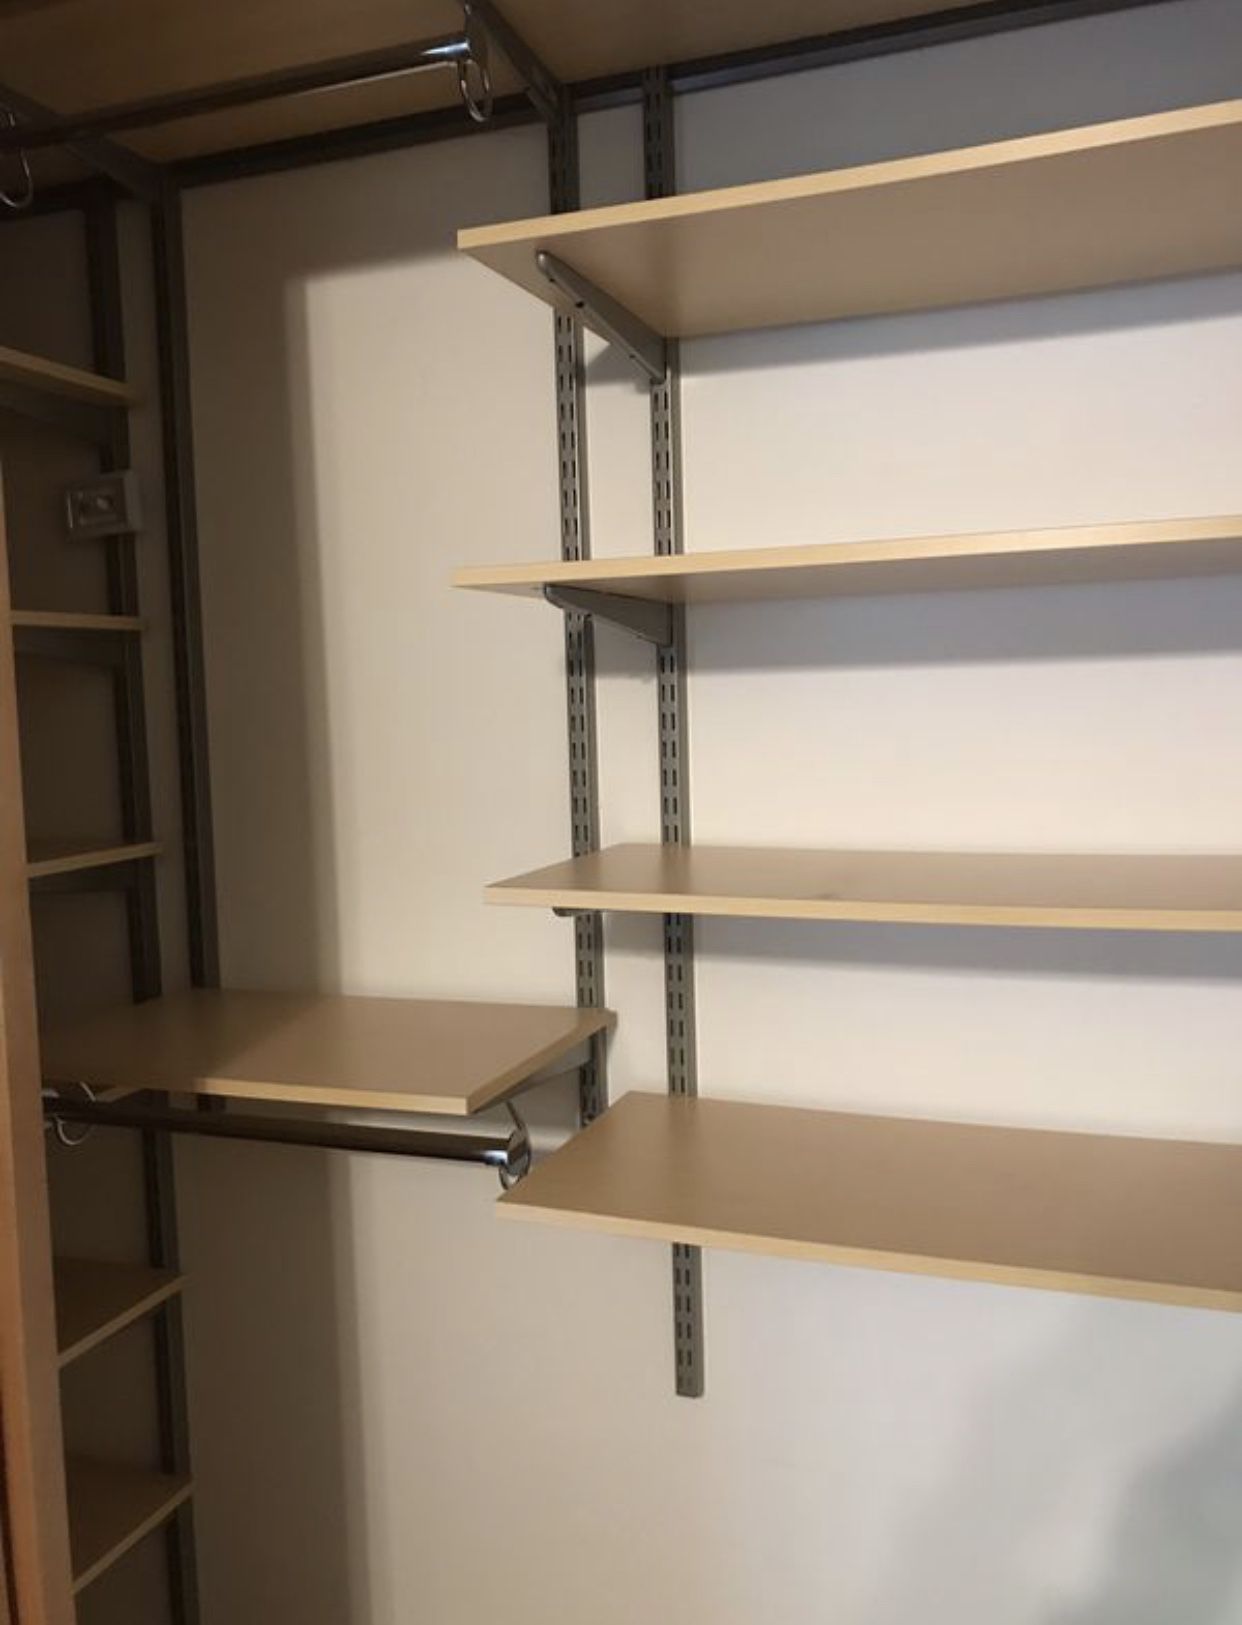 Shelving system. (from Container Store).